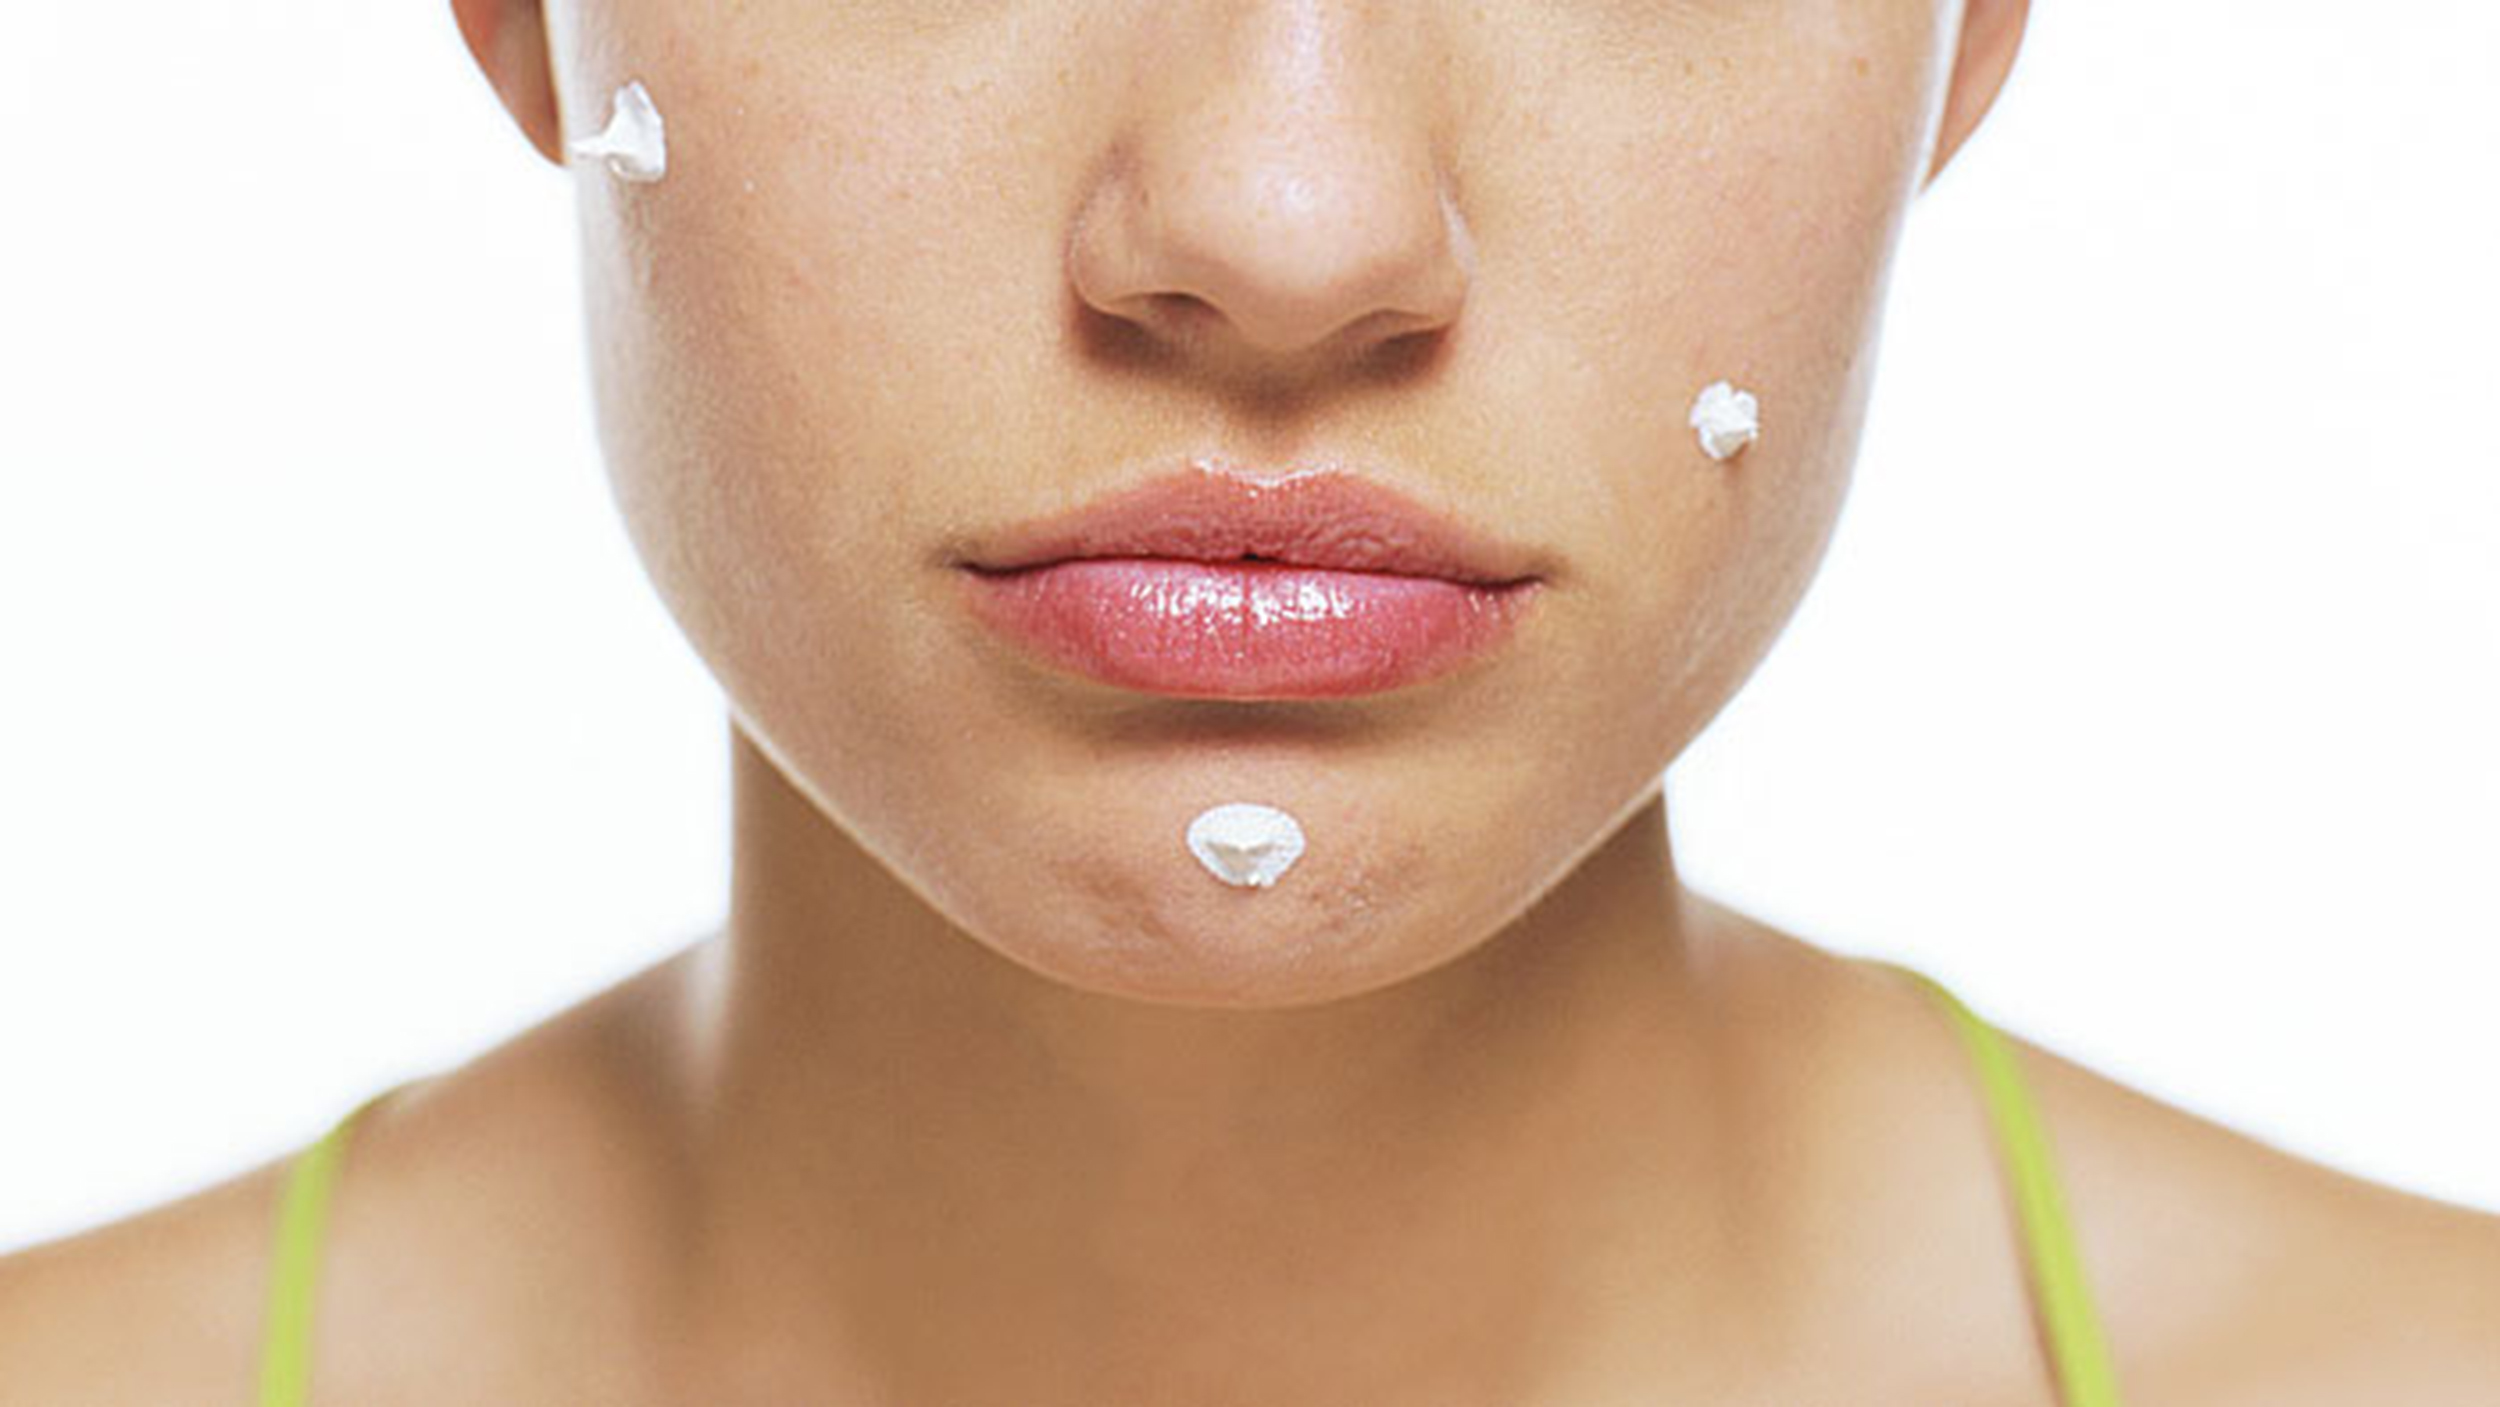 adult-acne-cures-stock-today-160212-tease_7997ee0de96317bd29183ae2f62c9ff8.jpg